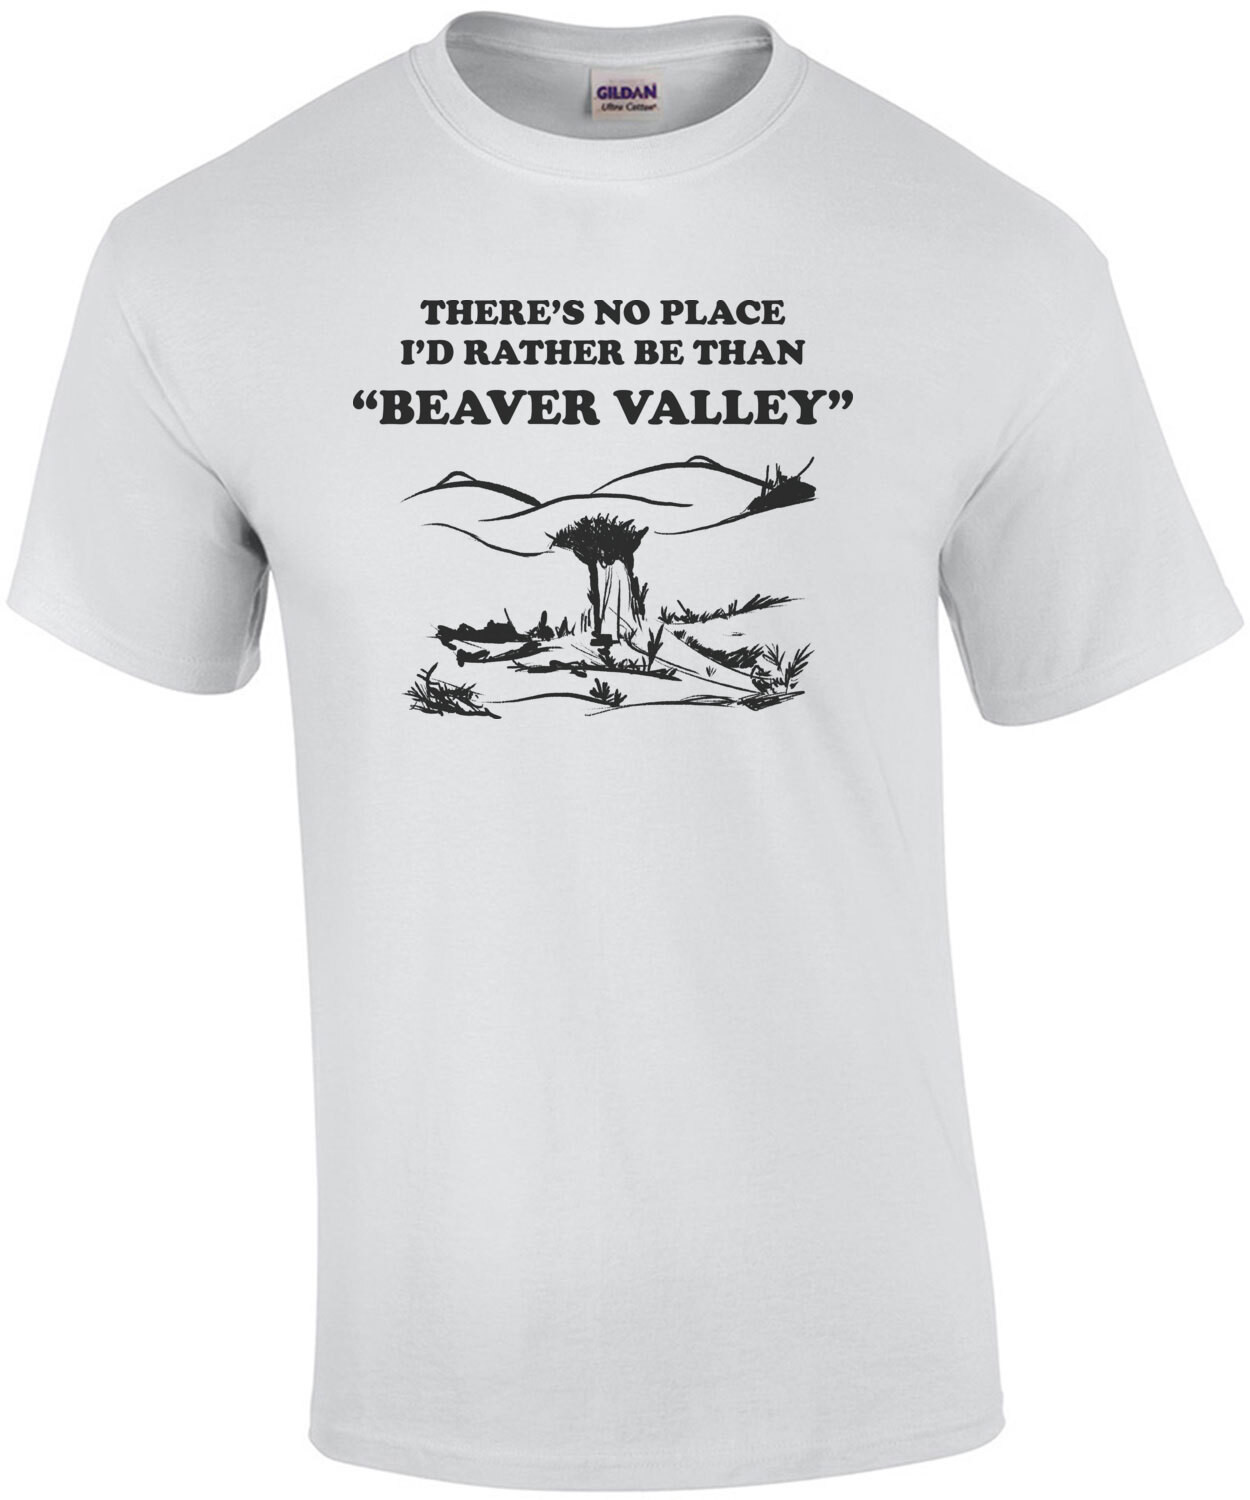 There's no place I'd rather be than Beaver Valley - offensive sexual t-shirt